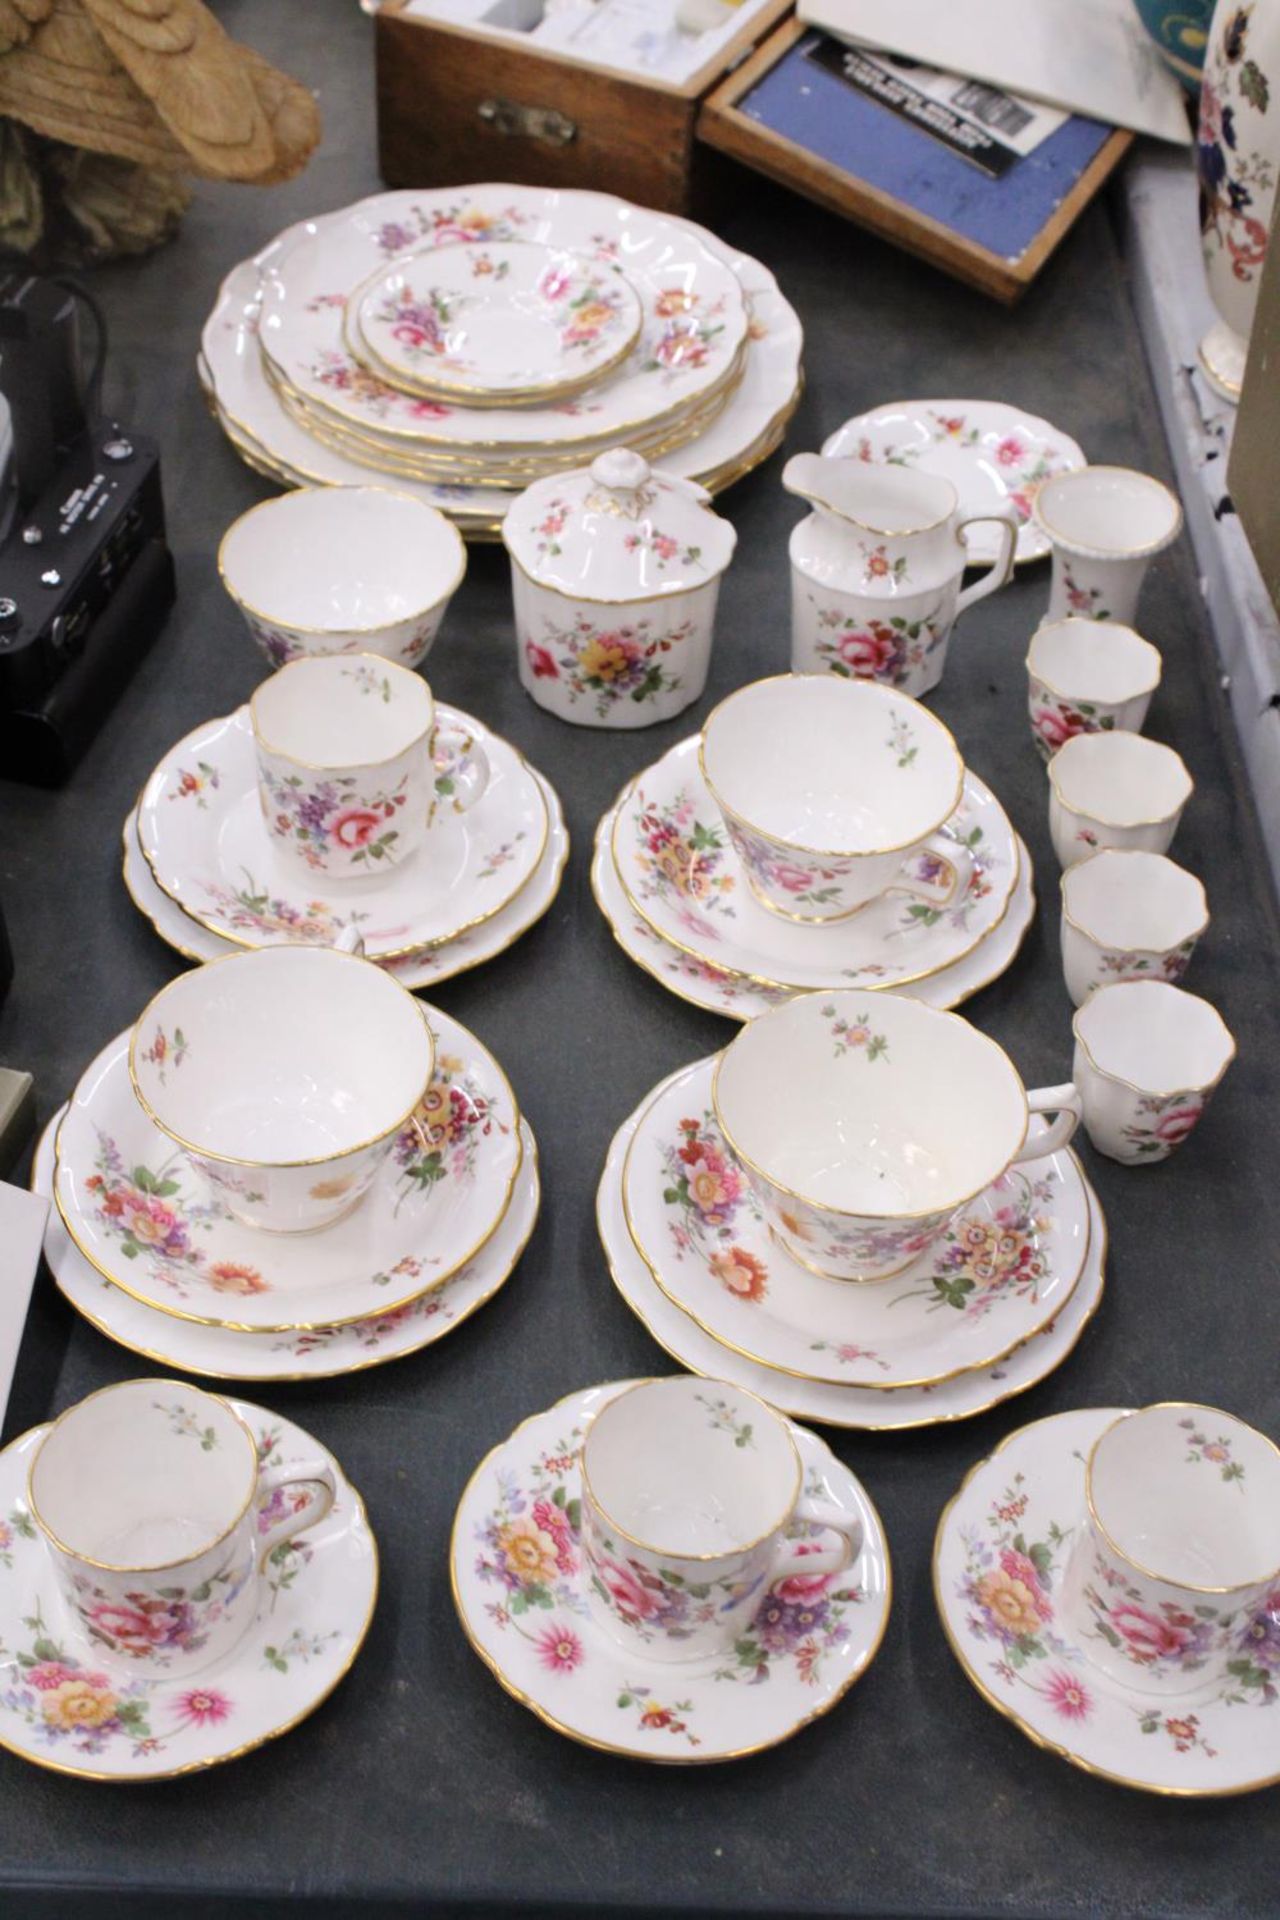 A COLLECTION OF ROYAL CROWN DERBY 'DERBY POSIES' CHINA TO INCLUDE CUPS AND SAUCERS, JUG, BEAKERS,